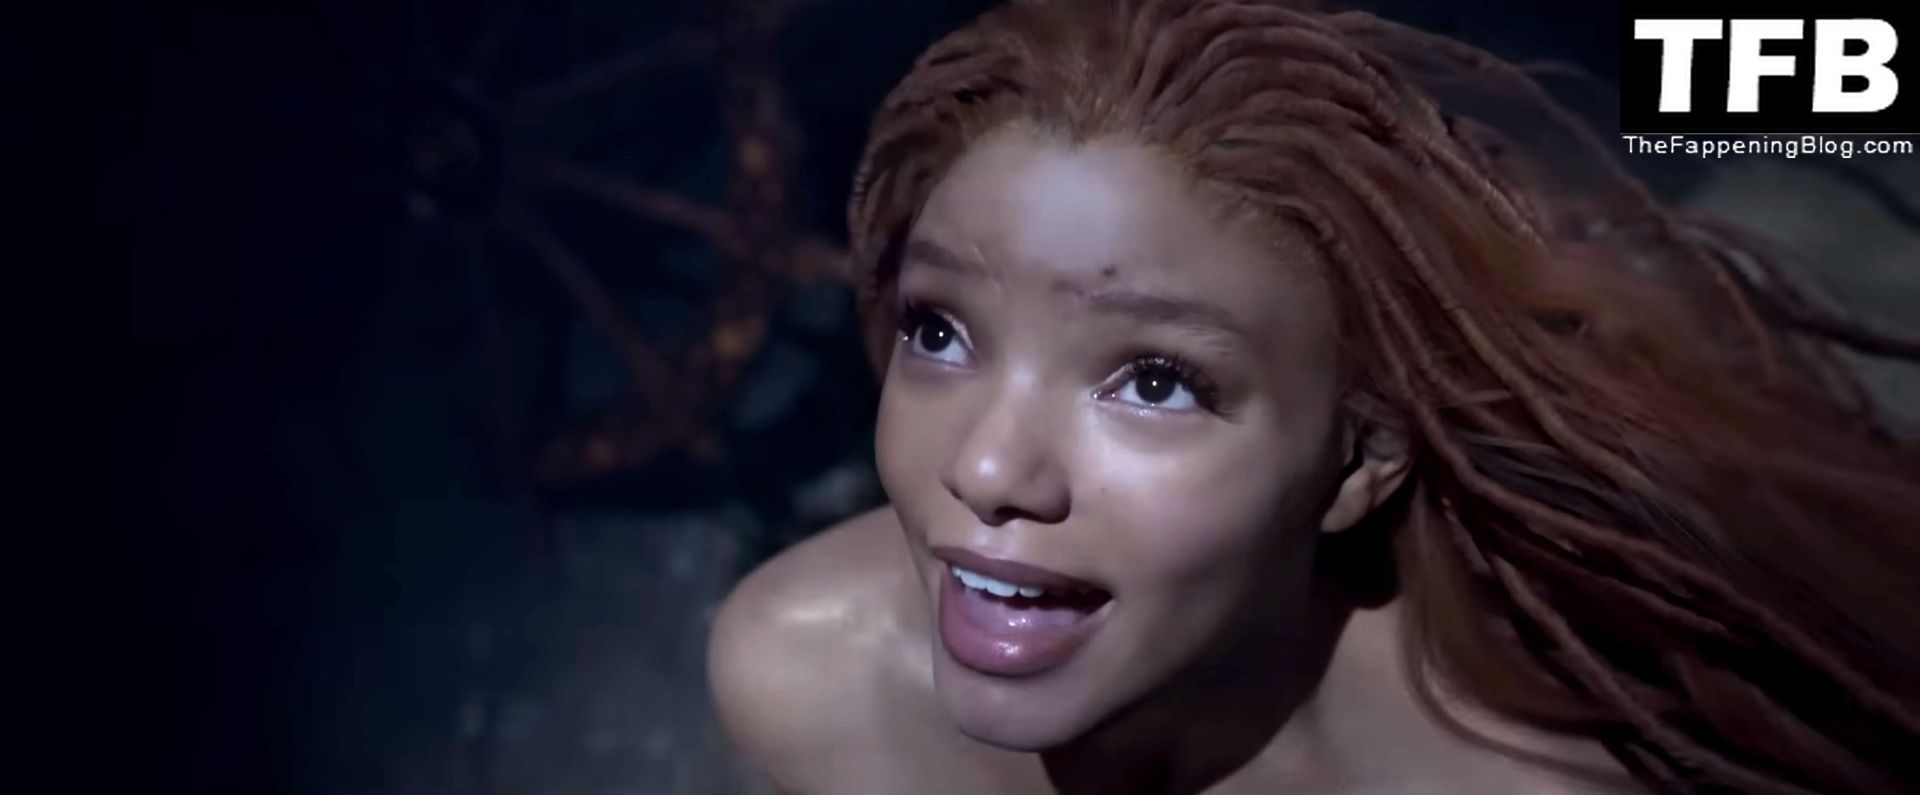 First look at Disney’s Live Action Teaser Trailer for “The Little Mermaid” Featuring Halle Bailey Singing a Classic (15 Pics + Video)